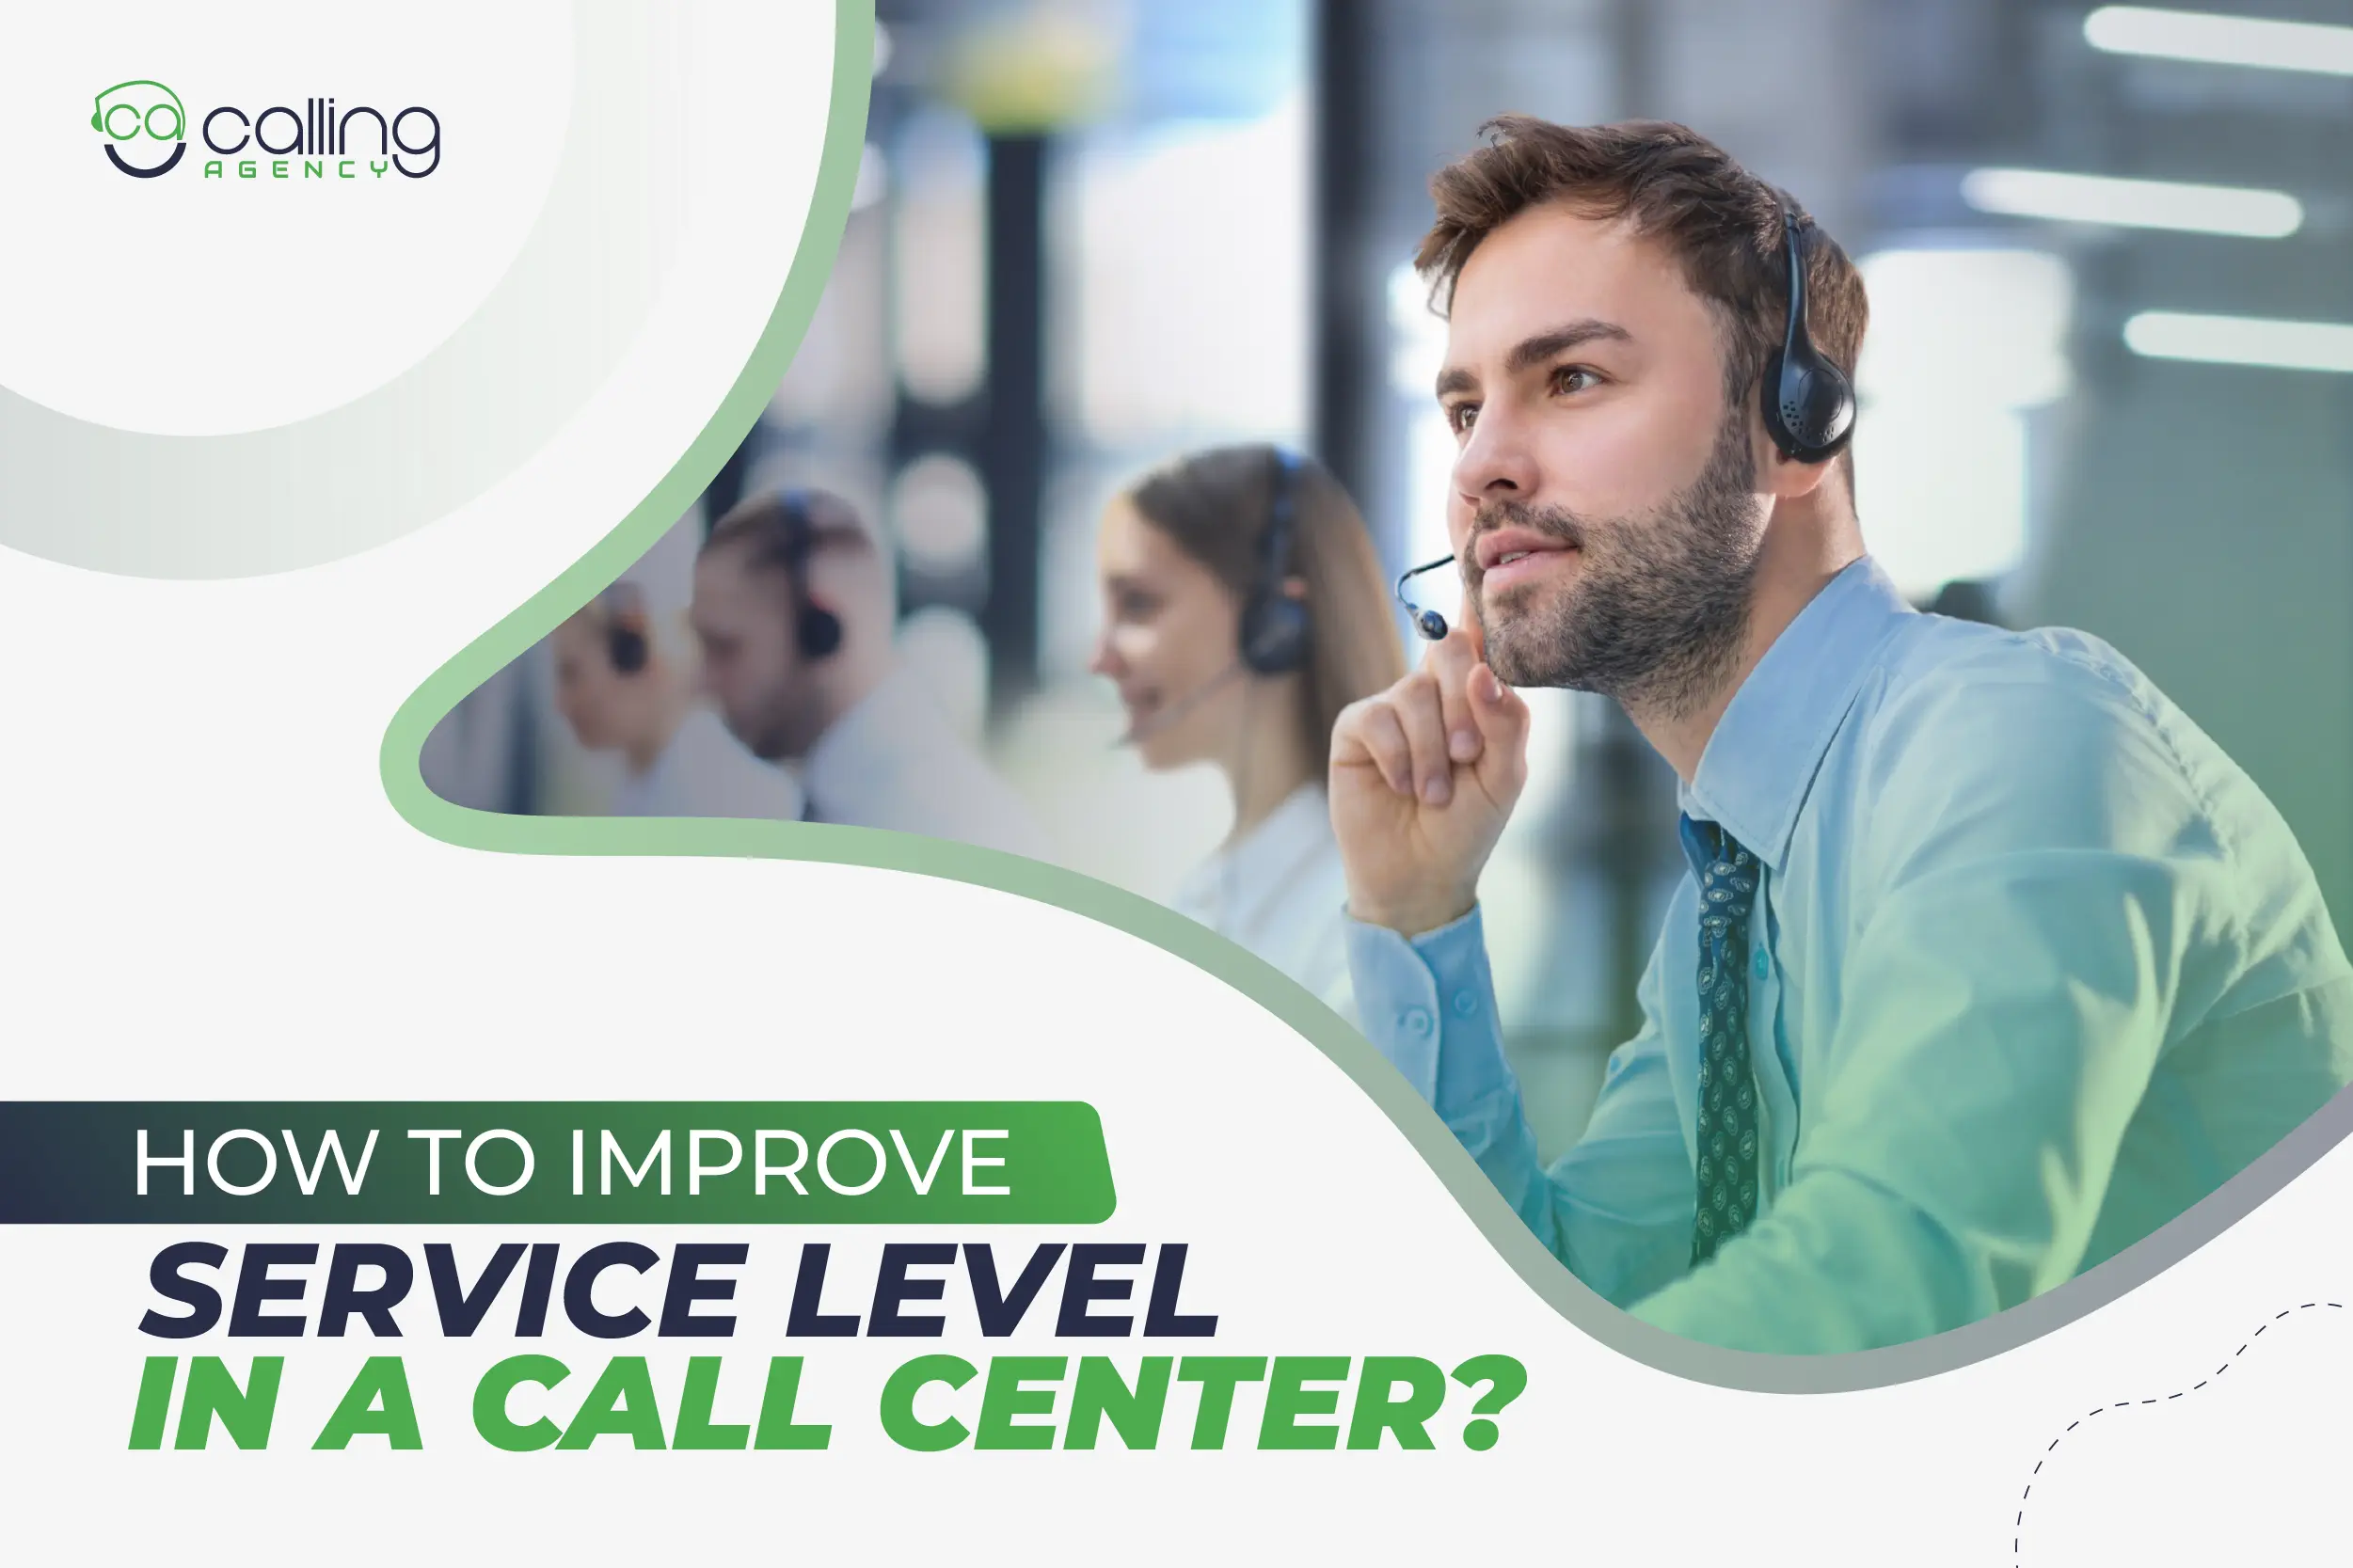 How To Improve Service Level In A Call Center?